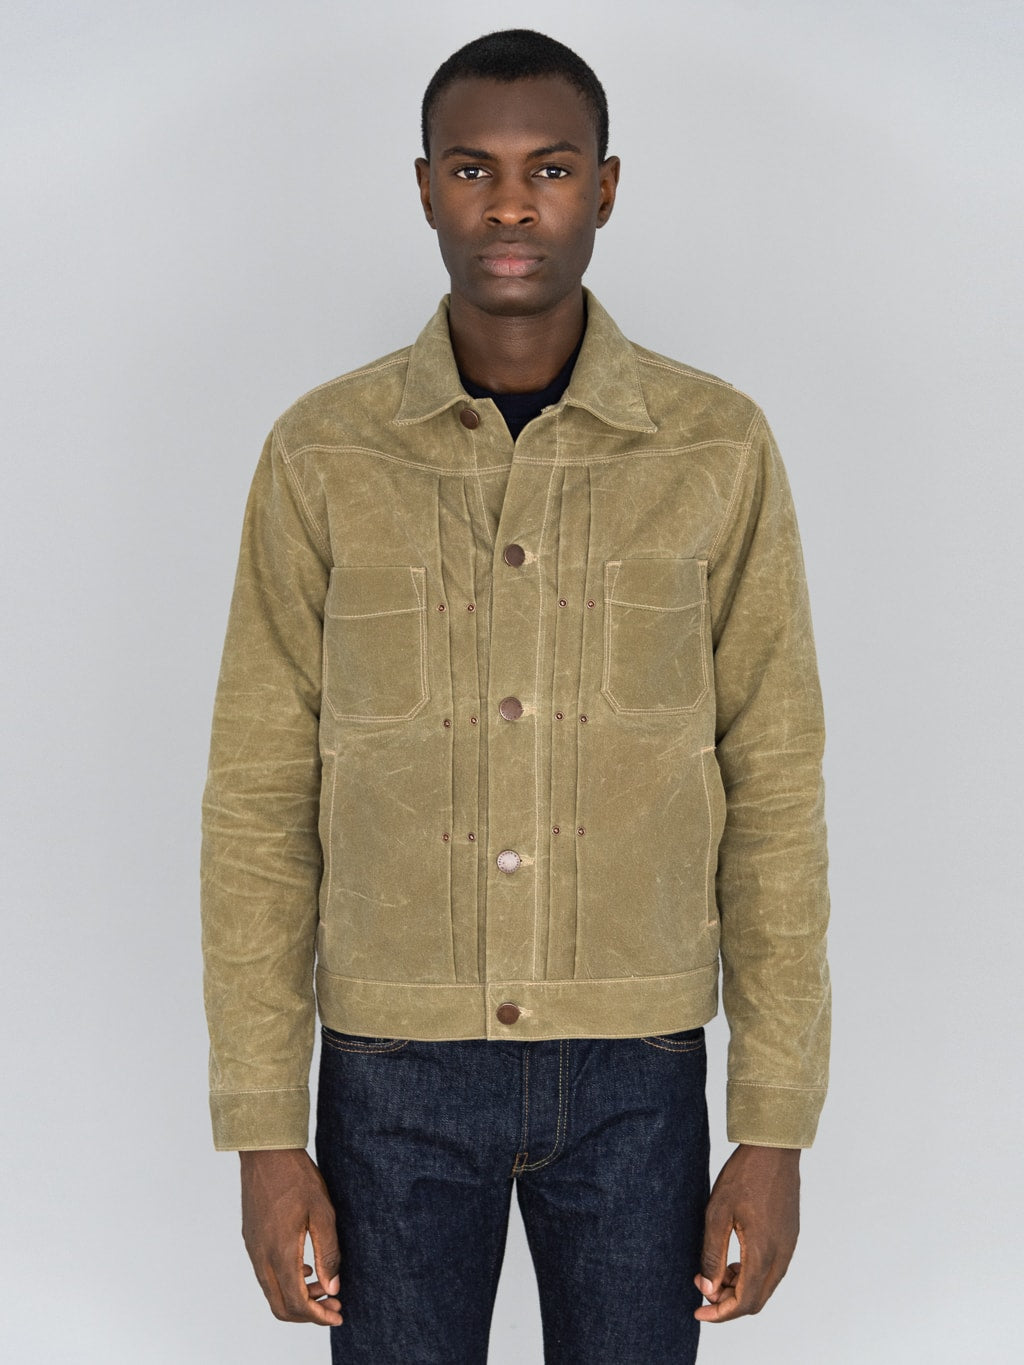 Freenote Cloth Riders Jacket Waxed Canvas Tobacco model front fit